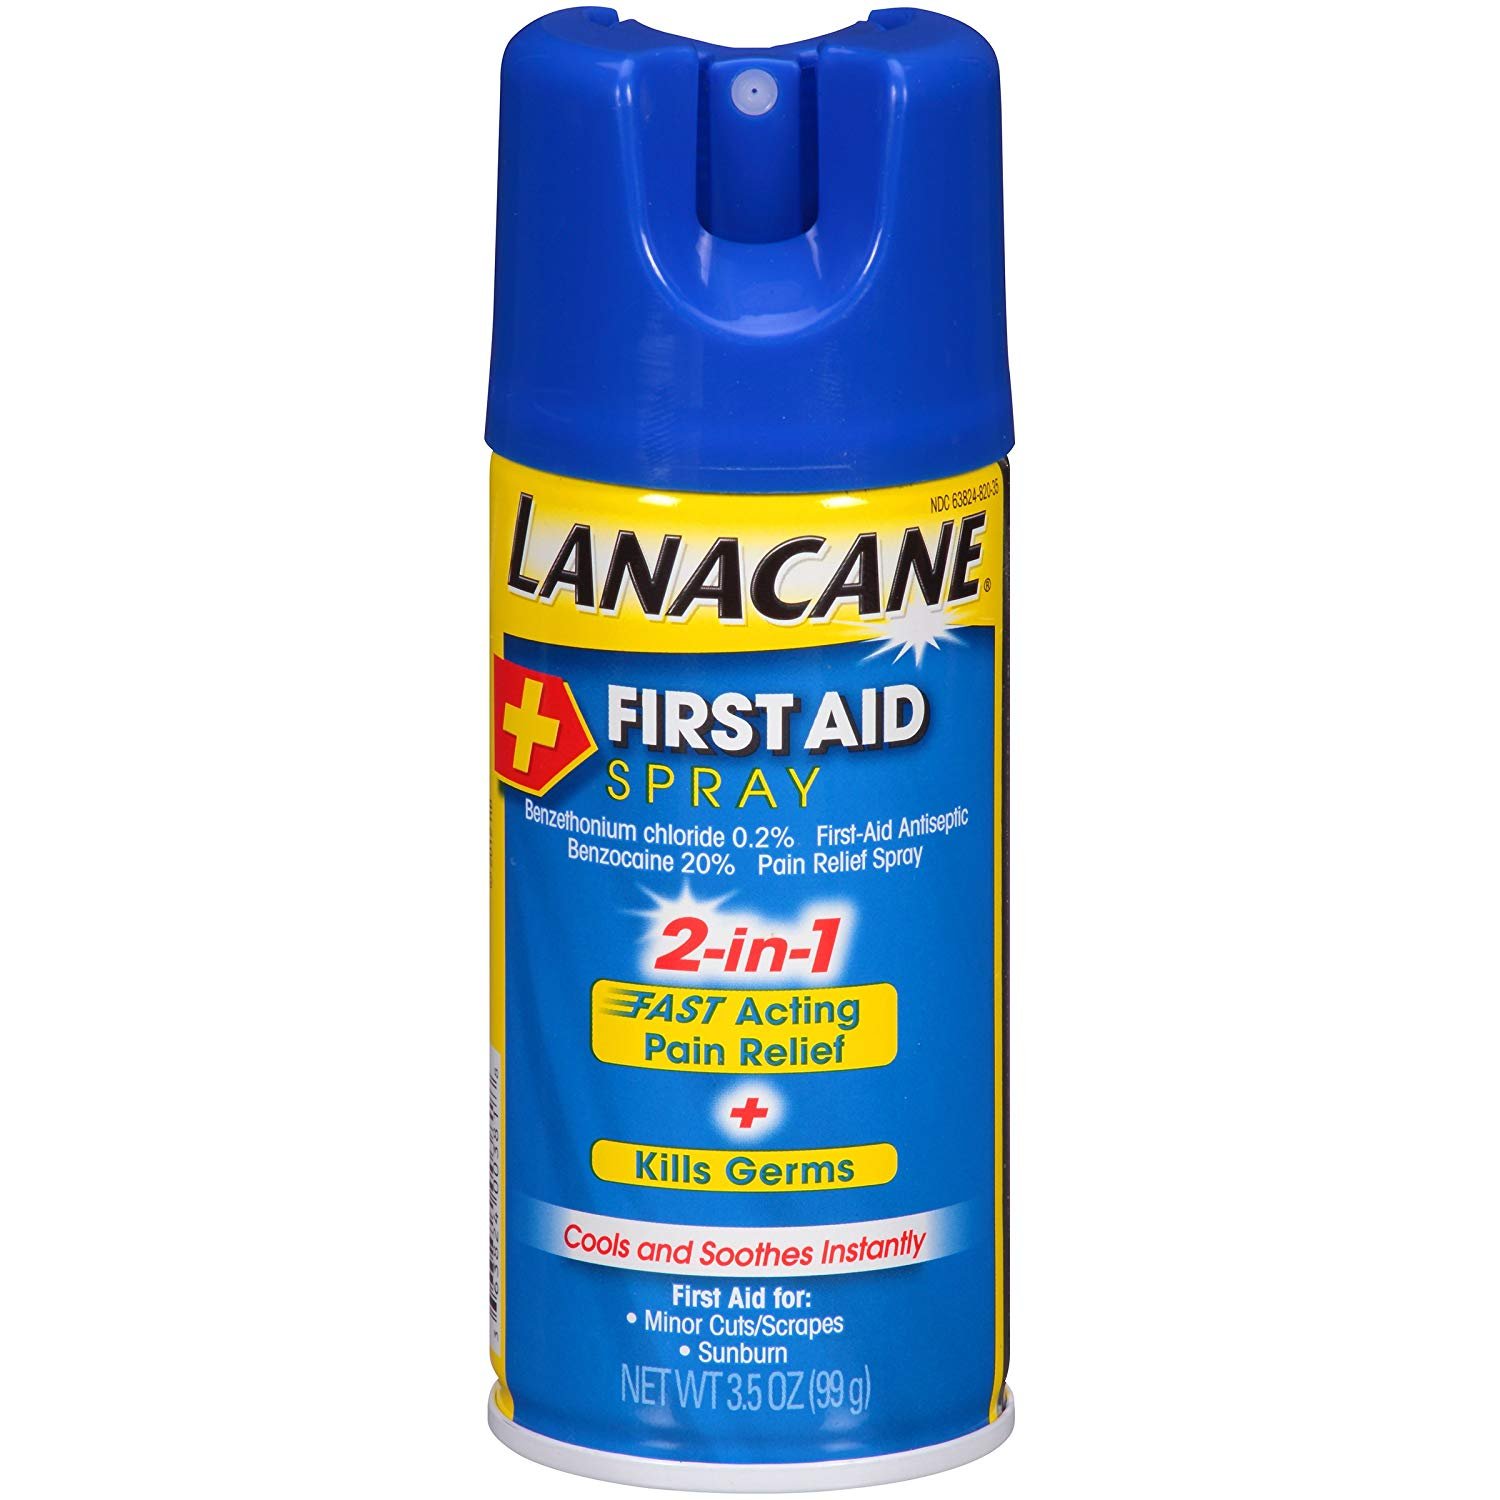 Book Cover Lanacane First Aid Spray- 2-in-1 Pain Relief and Antiseptic Spray For Fast-acting Relief From Insect Bites, Cuts, Scrapes, and Burns, Cools and Soothes Instantly, With Benzocaine, 3.5 oz (Pack of 2)